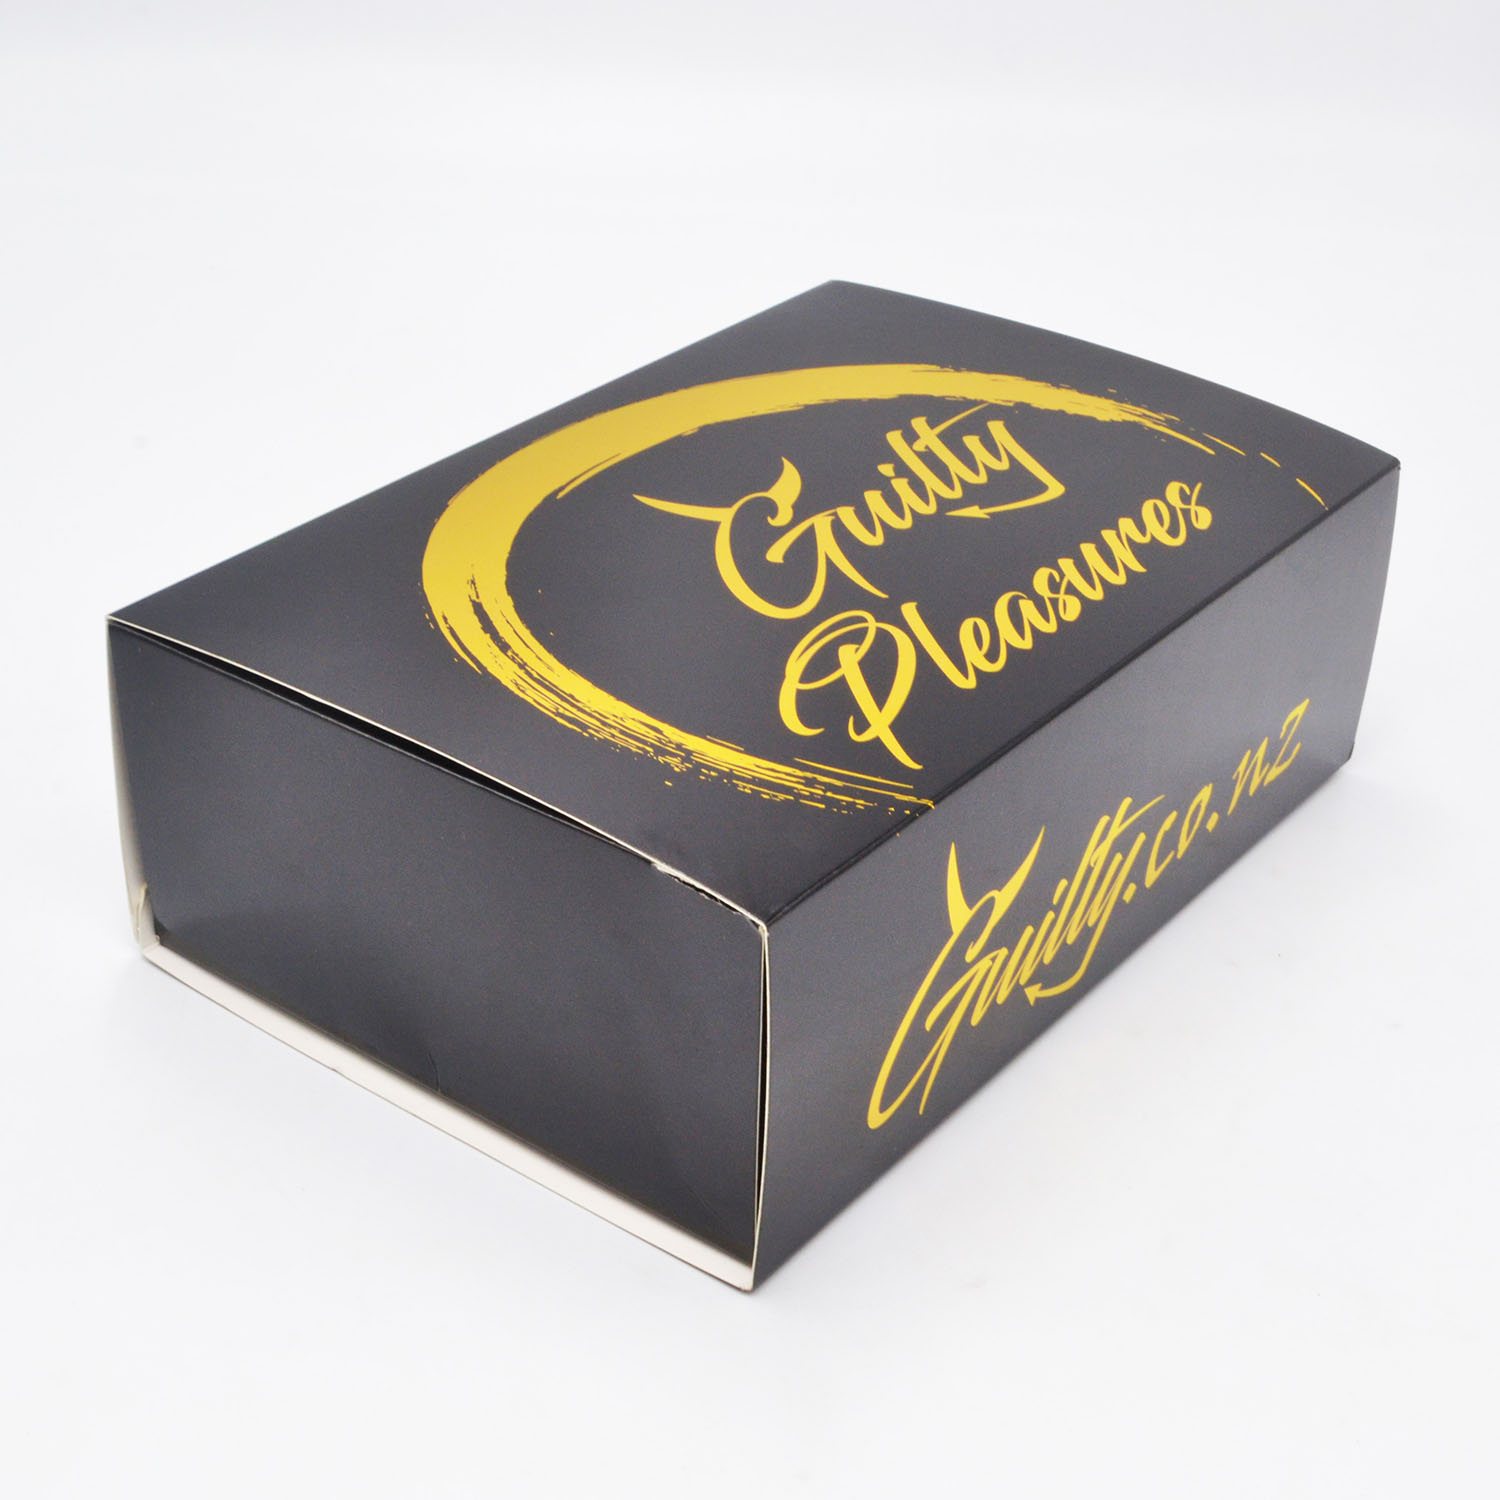 color printed Cupcake Cake Box Packaging with gold stamping